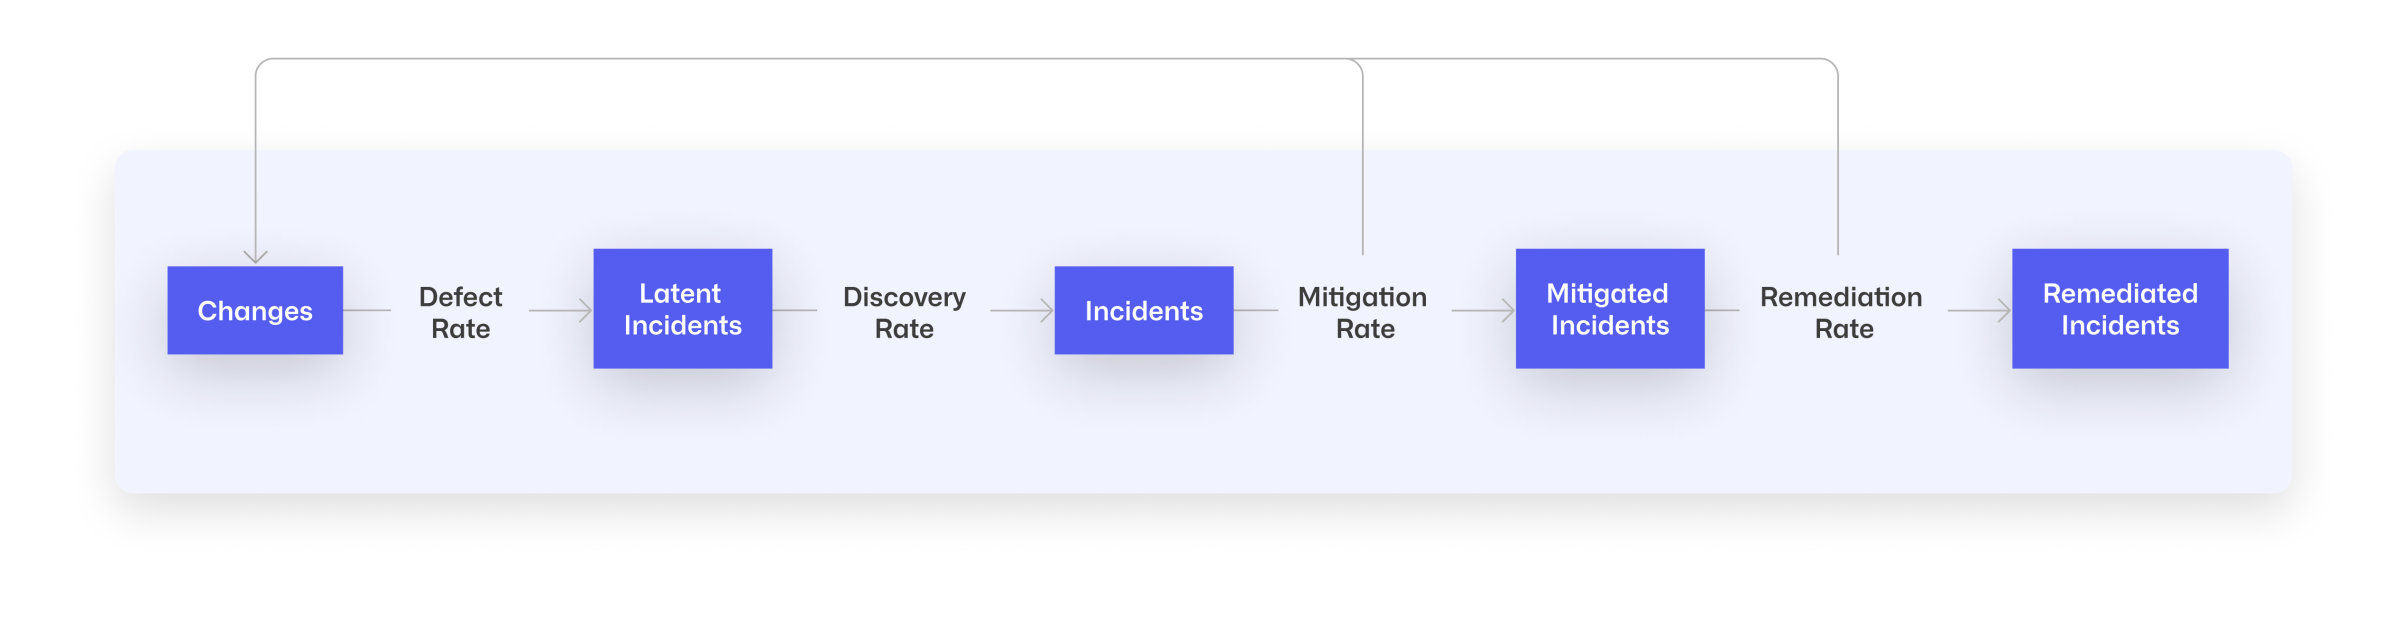 Flow chart starts on left with Changes, then defect rate, latent incidents, discovery rate, incidents, mitigation rate, mitigated incidents, remediation rate, remediated incidents. Remediation rate and Mitigation rate have arrows that point back to Changes